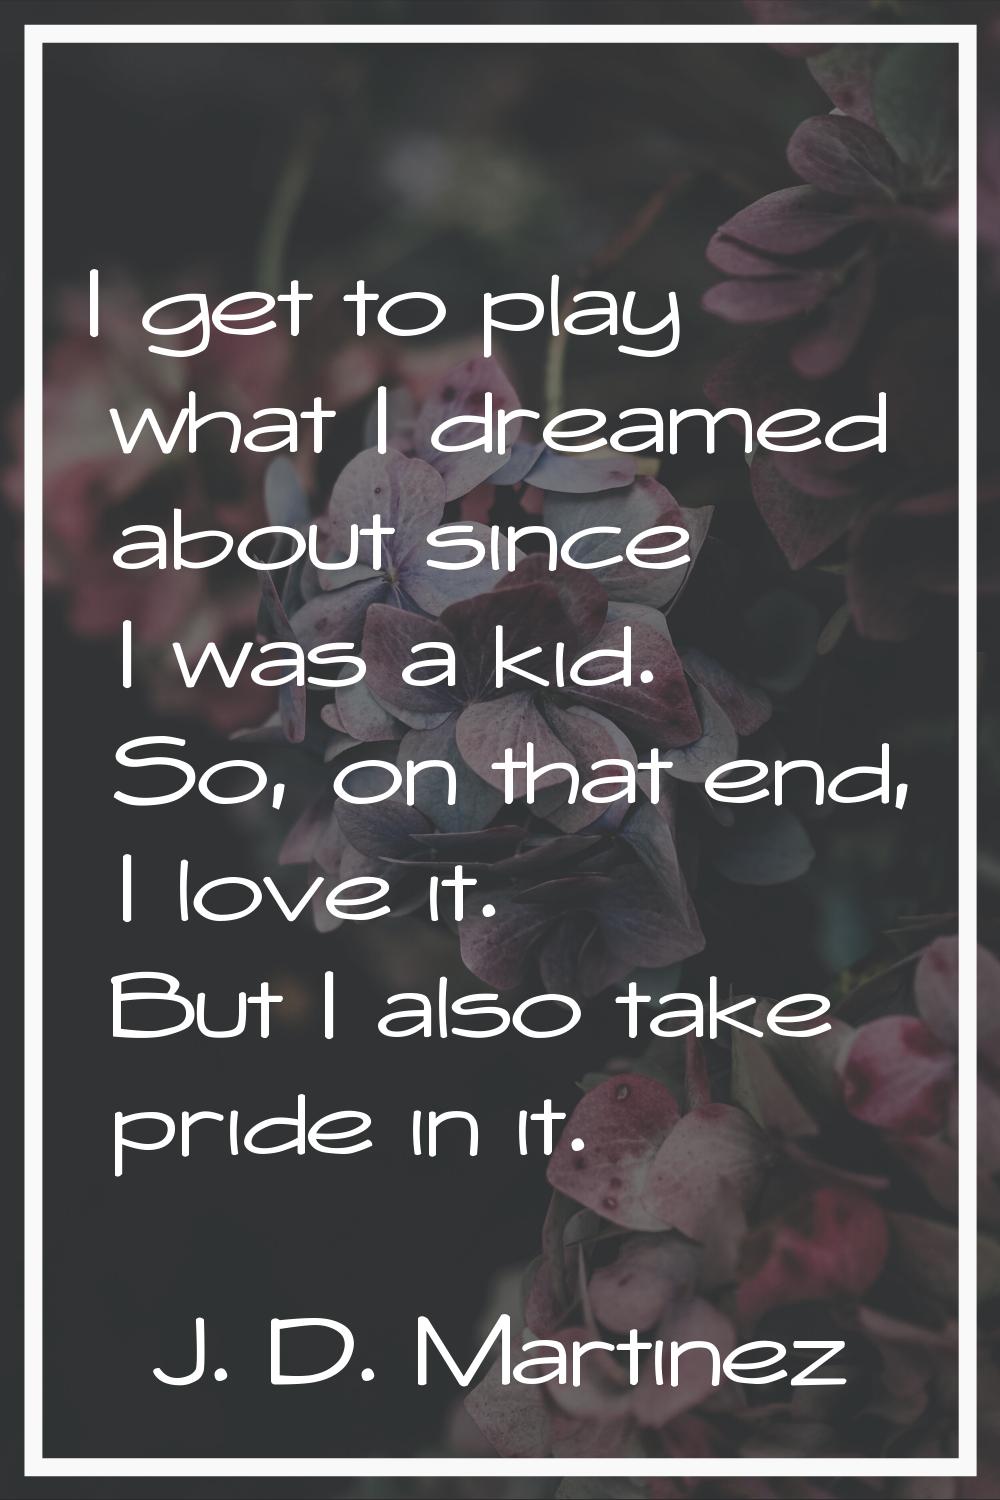 I get to play what I dreamed about since I was a kid. So, on that end, I love it. But I also take p